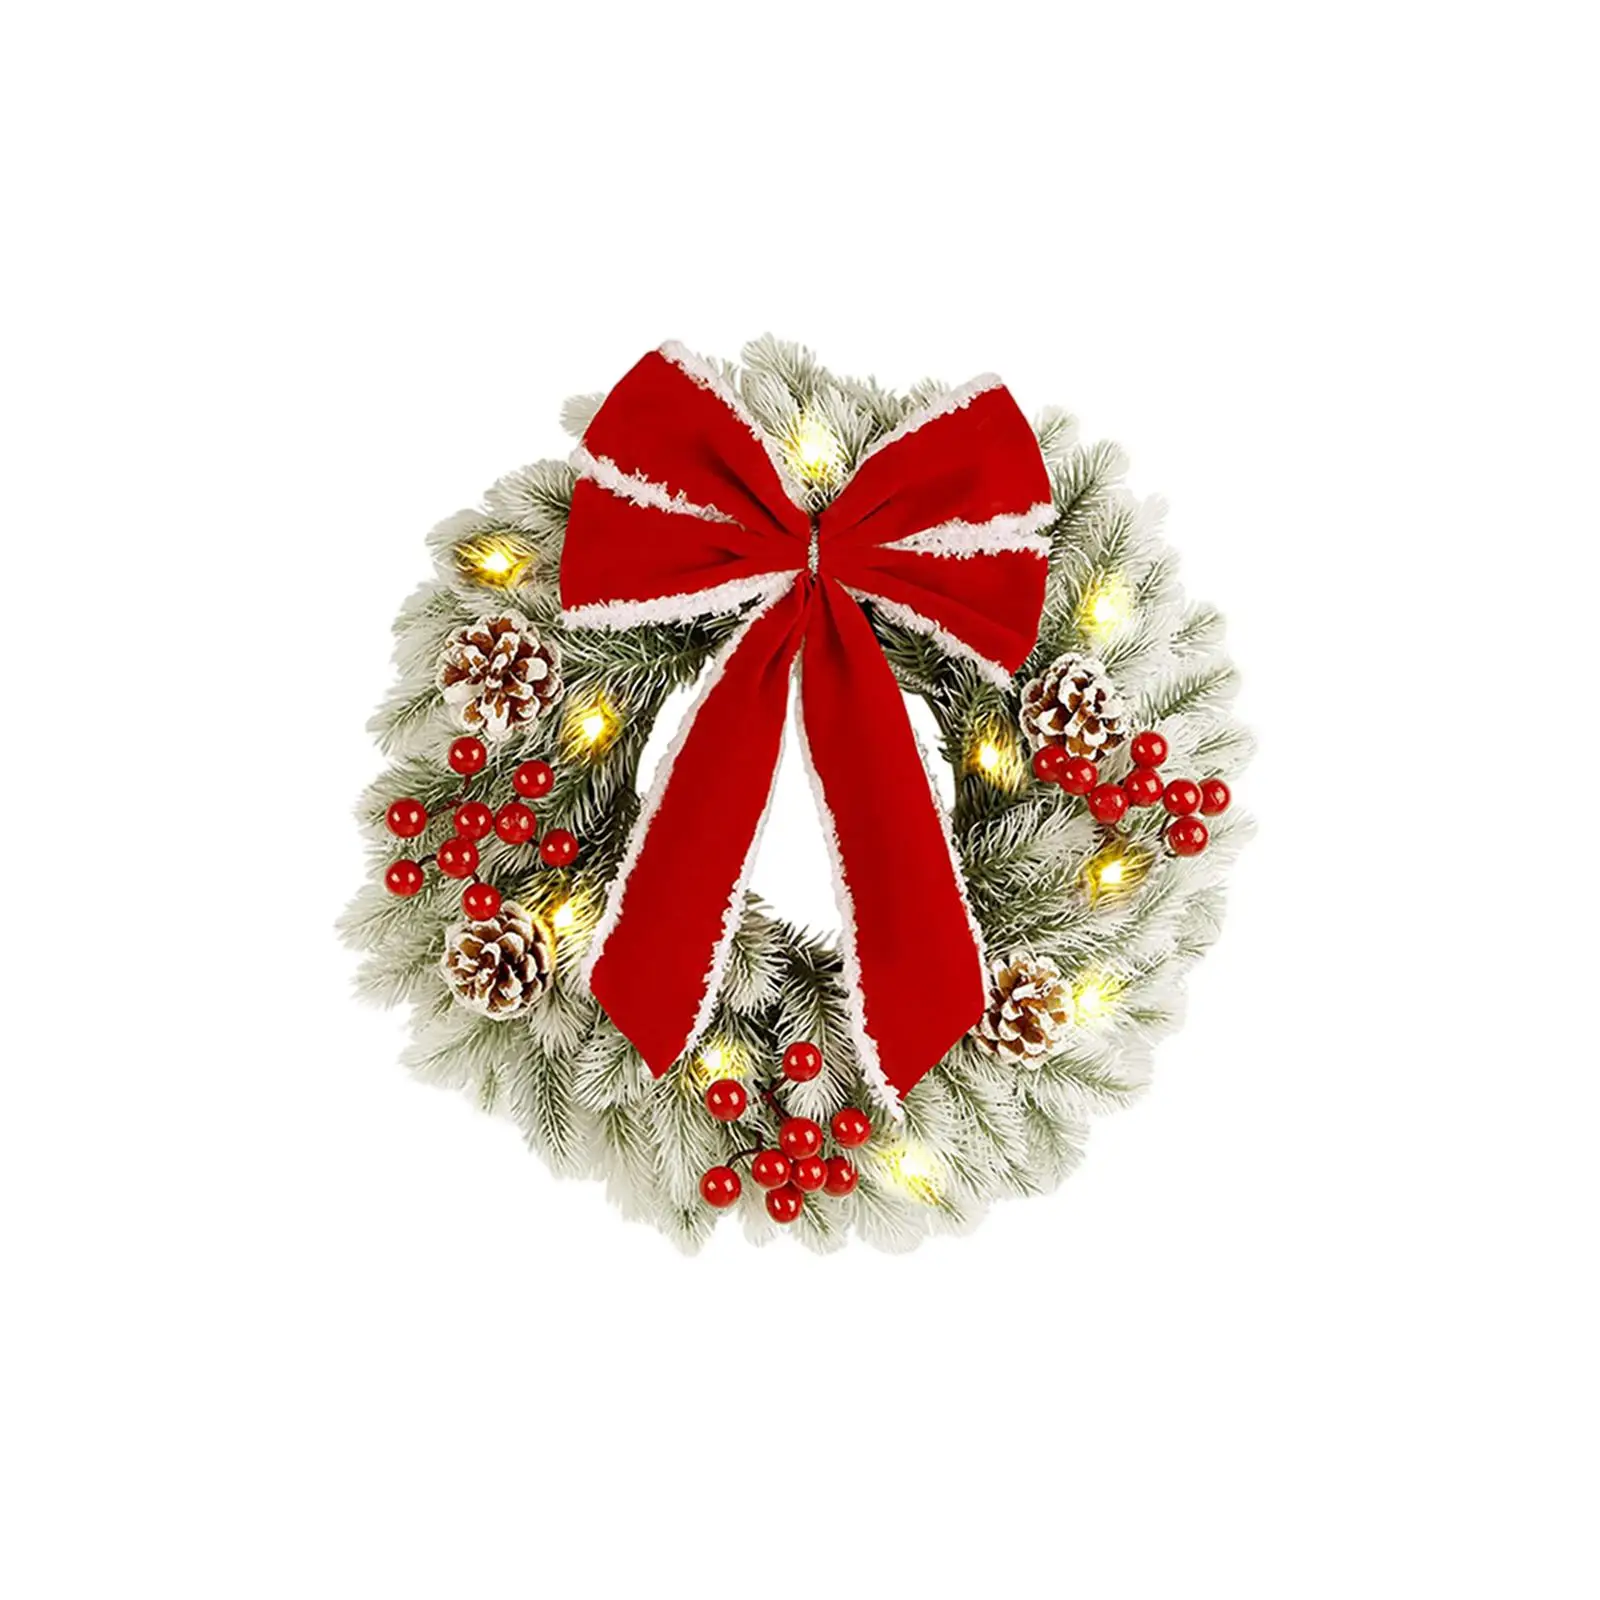 Glowing Christmas Wreath Warm White Lighting Door Wreath Holiday Garland Decoration for Porch Wall Party Indoor Outdoor Ornament